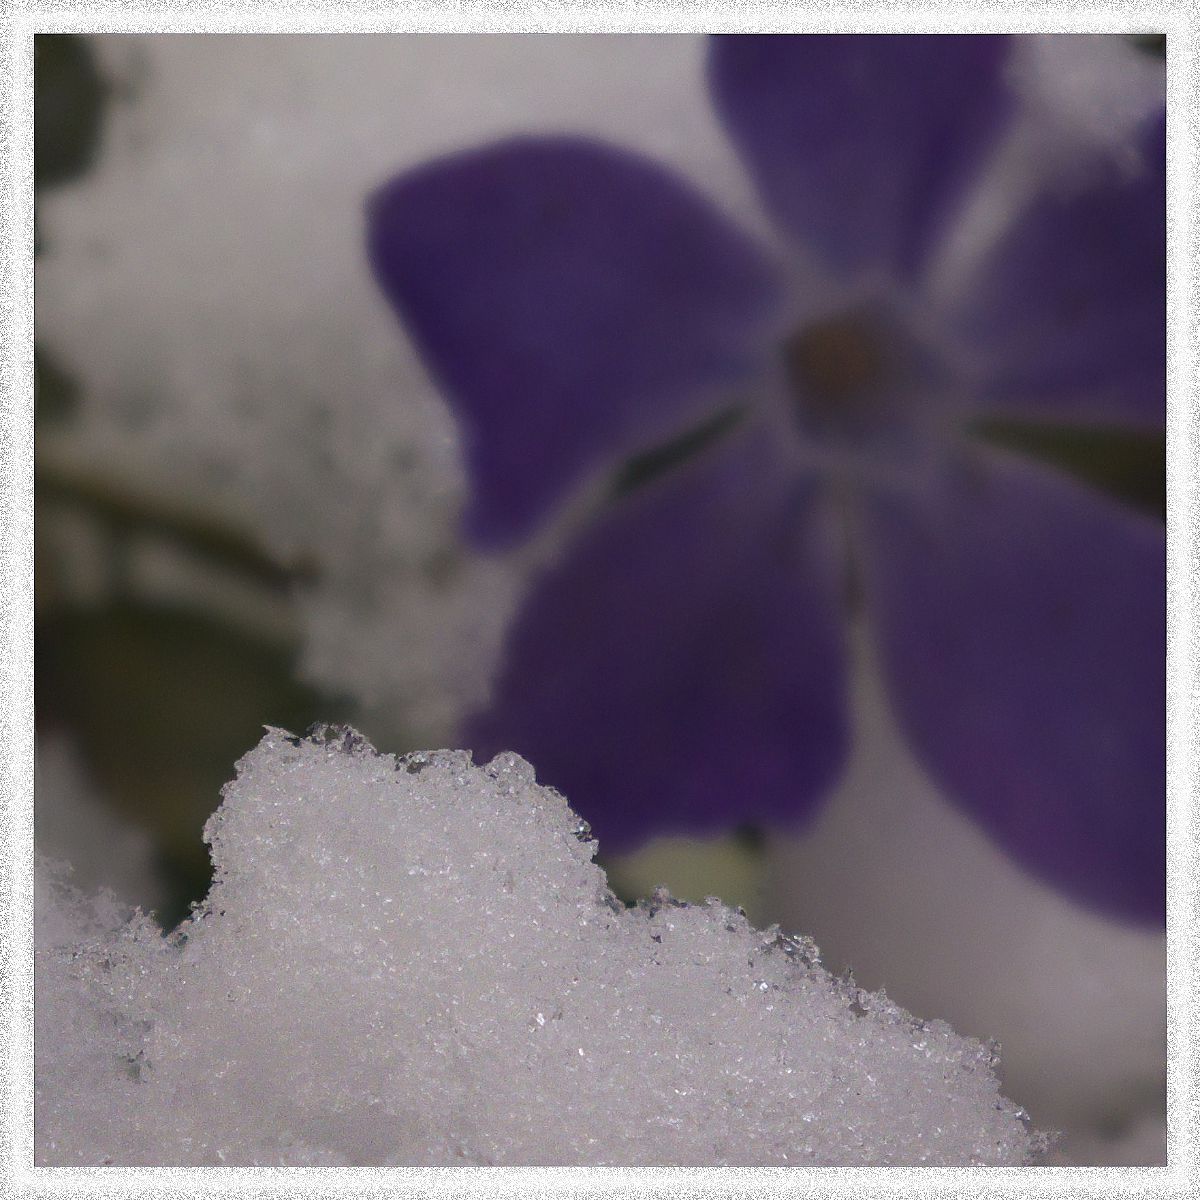 Flowers and Snow